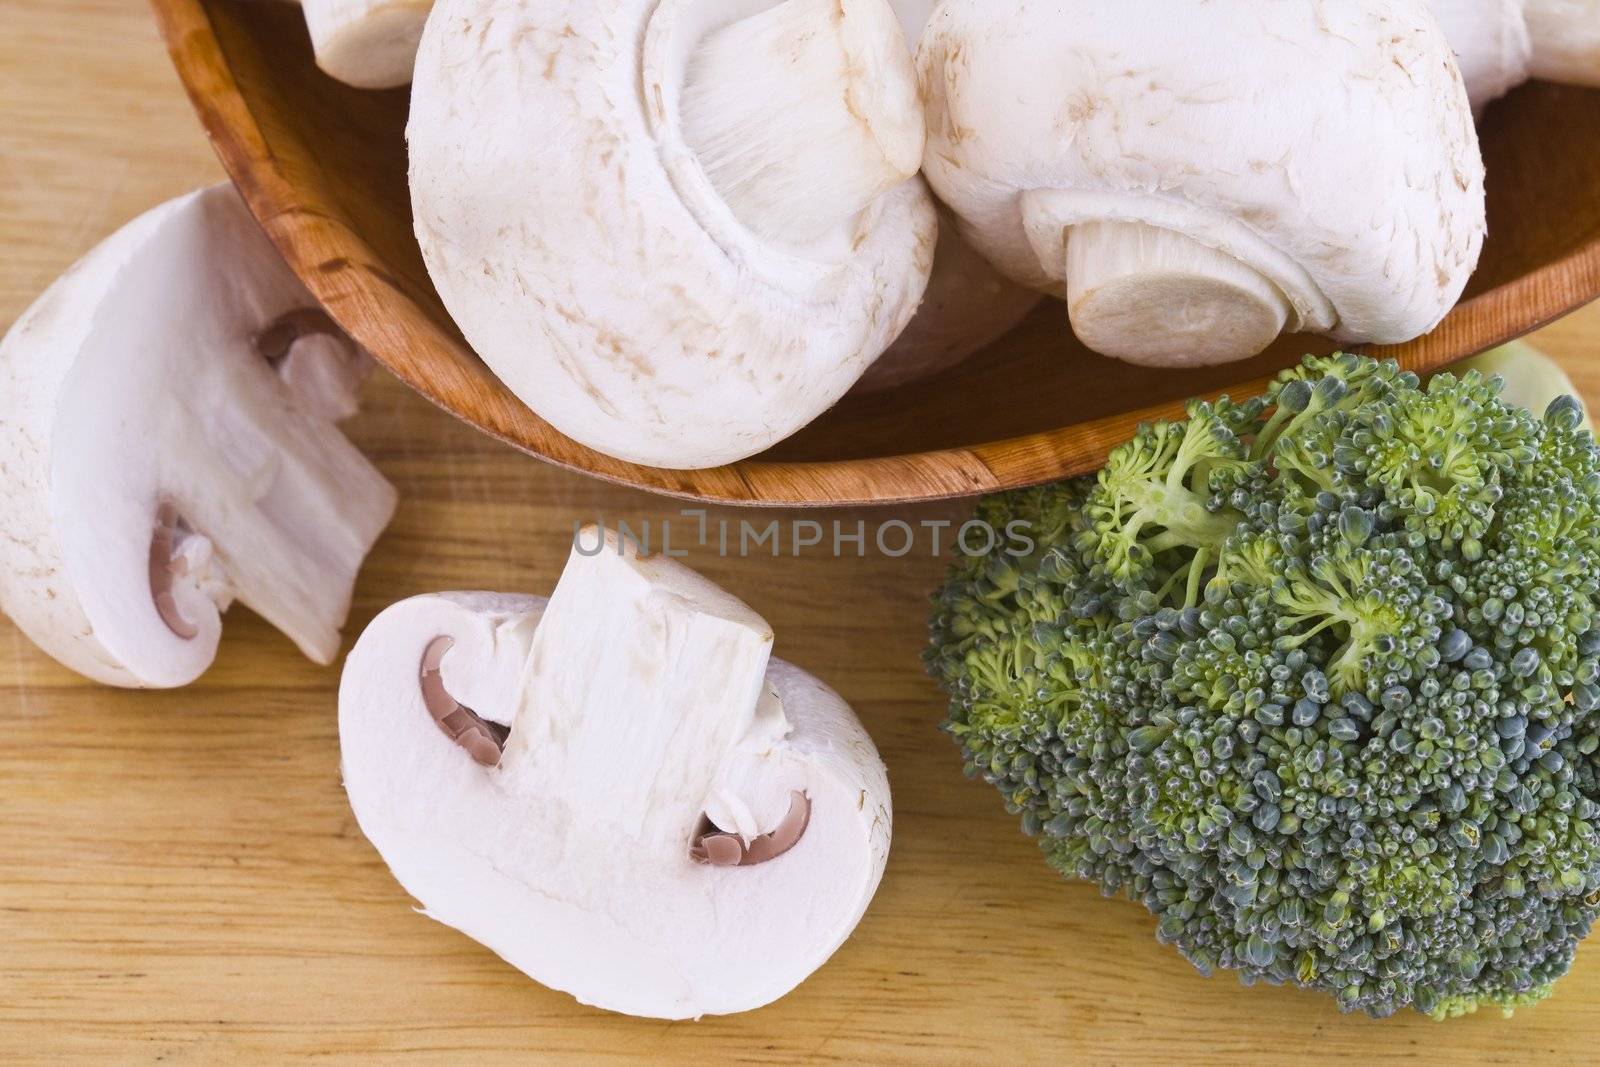 Fresh mushrooms and broccoli in the wooden cutting board